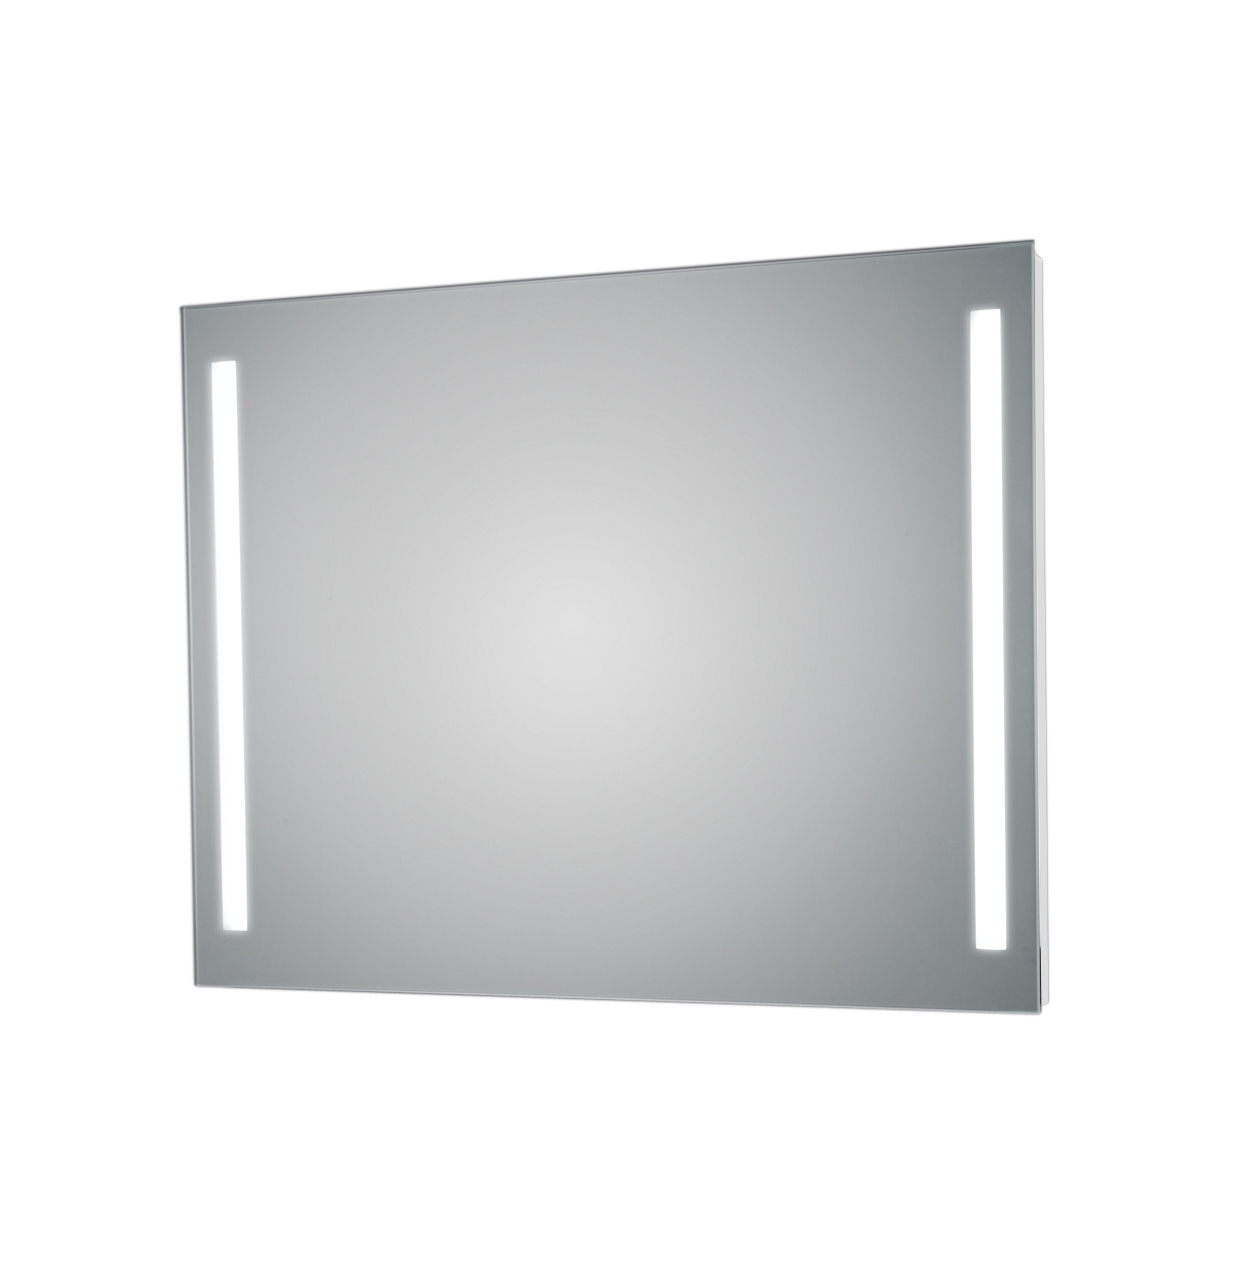 T5-2 mirror with LED light 27.5 x 35.4